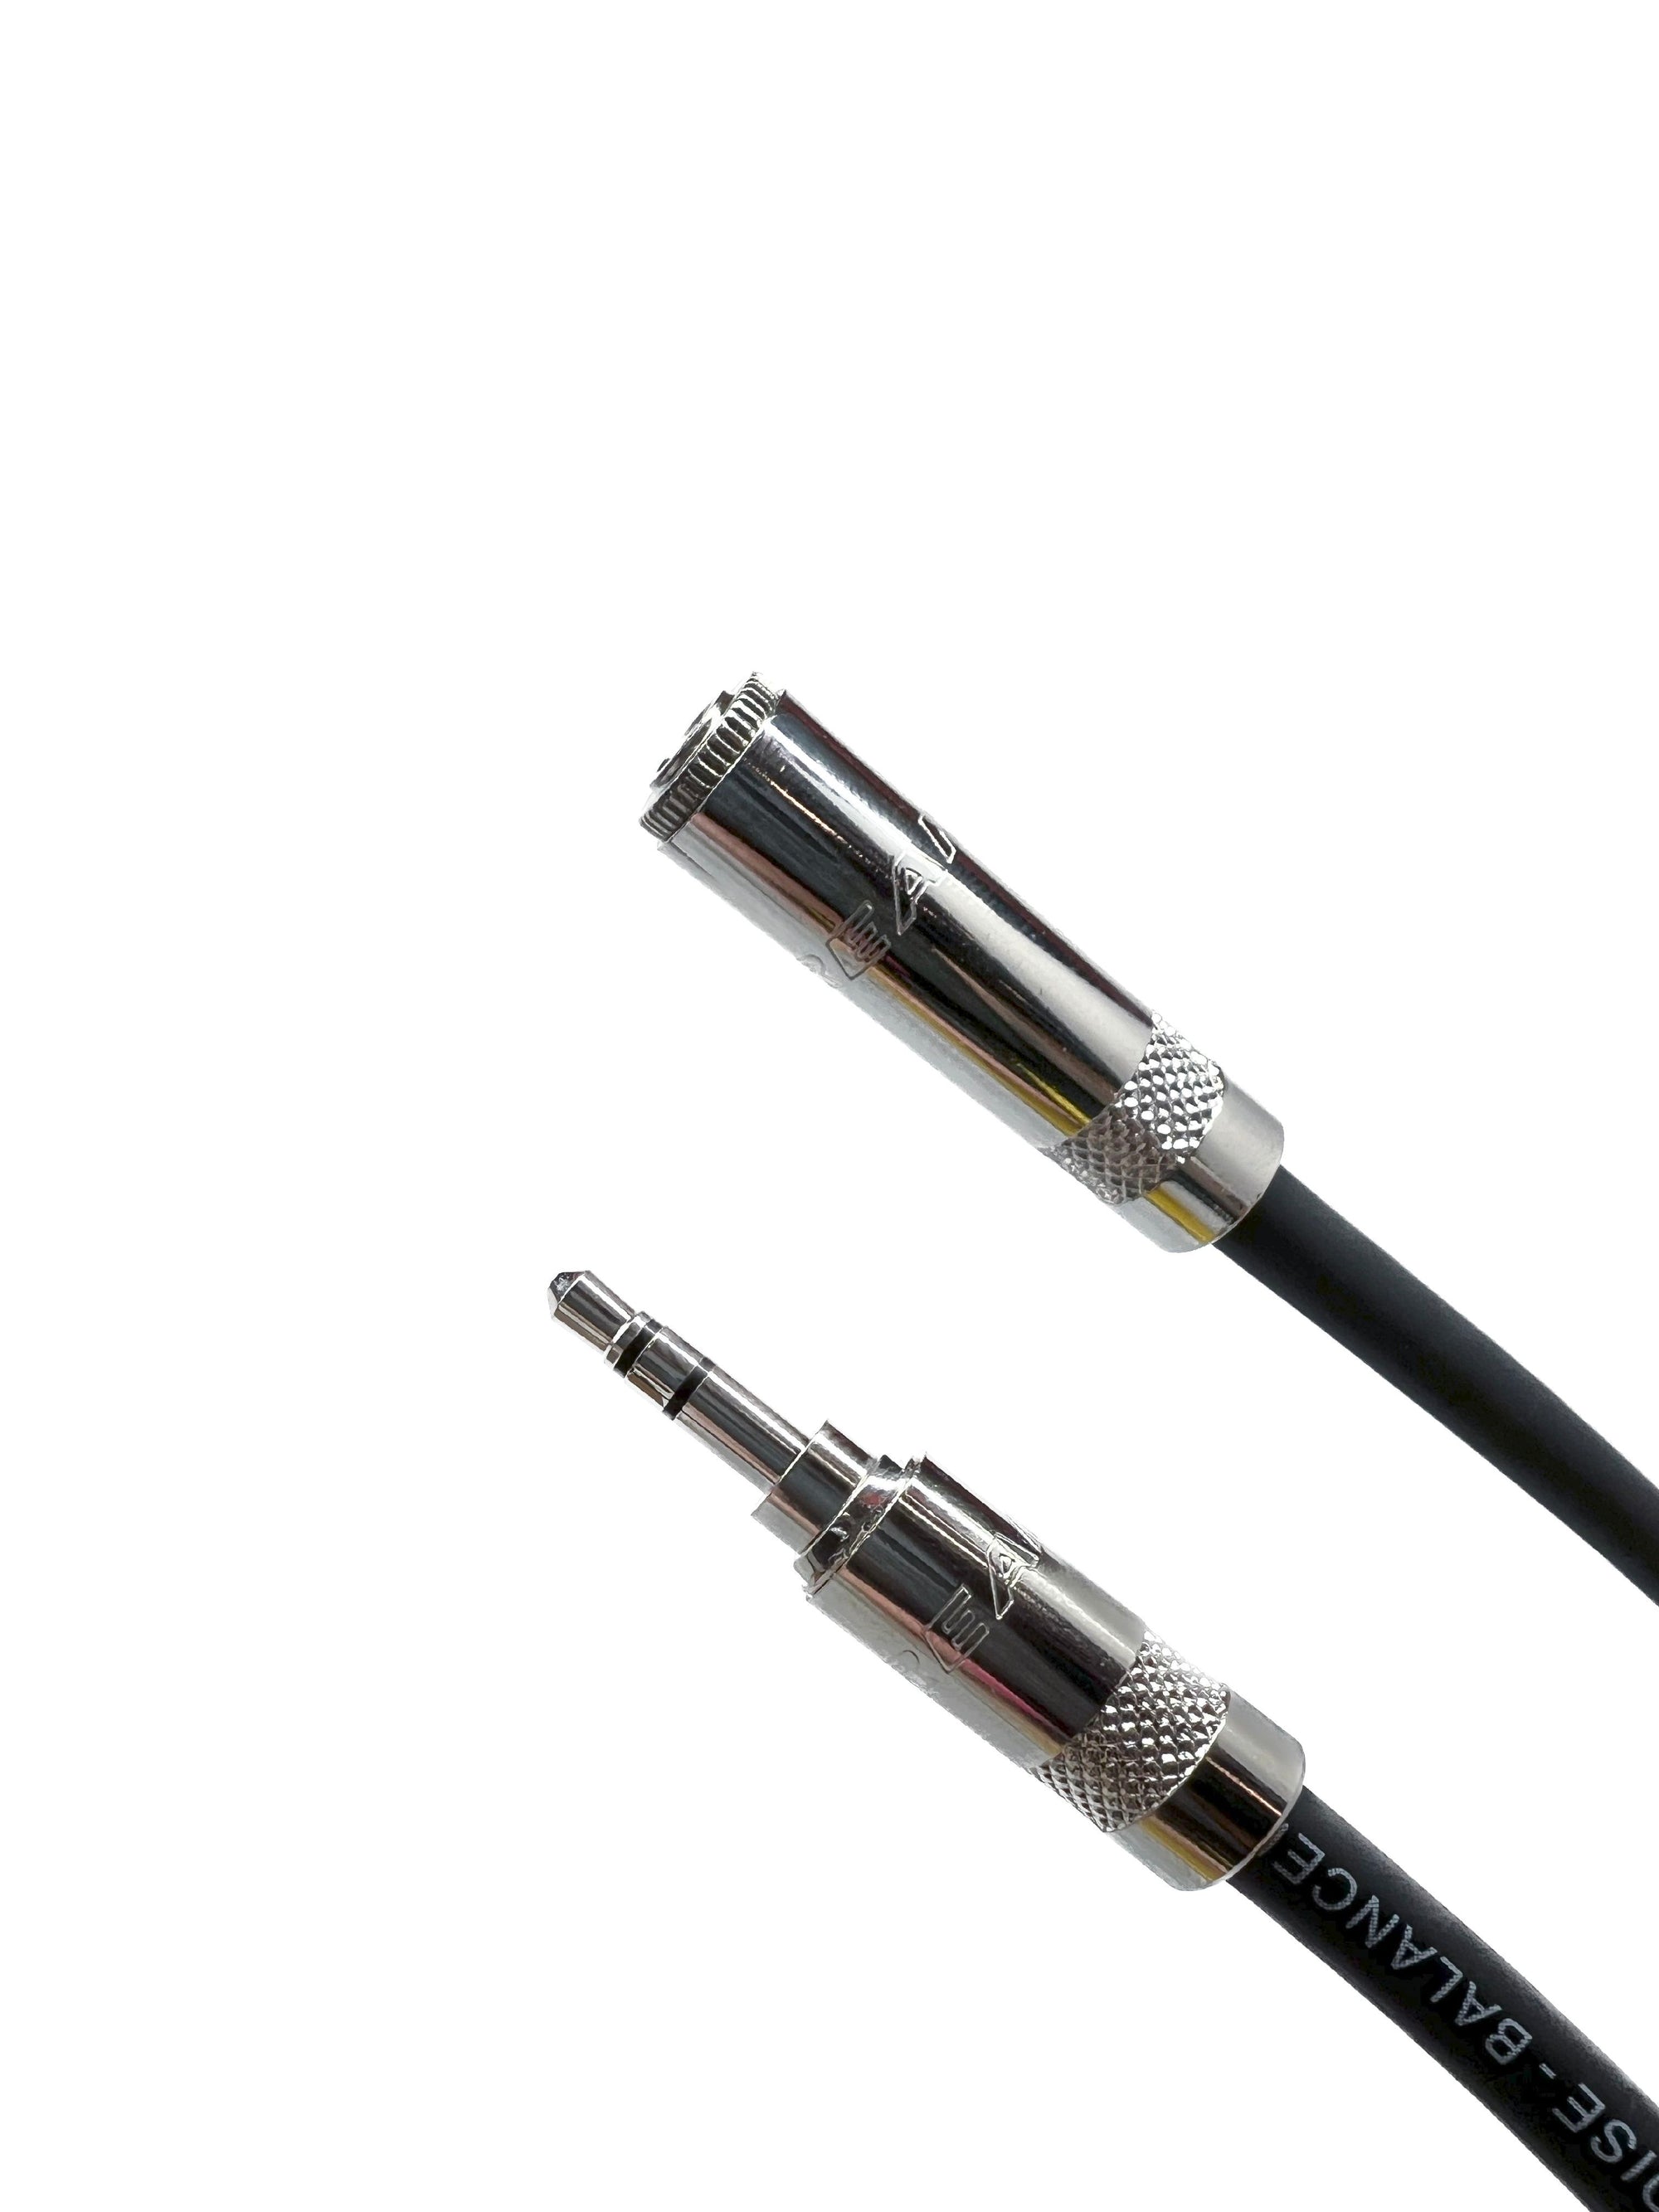 3.5mm 1/8-Inch Male Mini Plug Stereo Audio Cable (12ft)